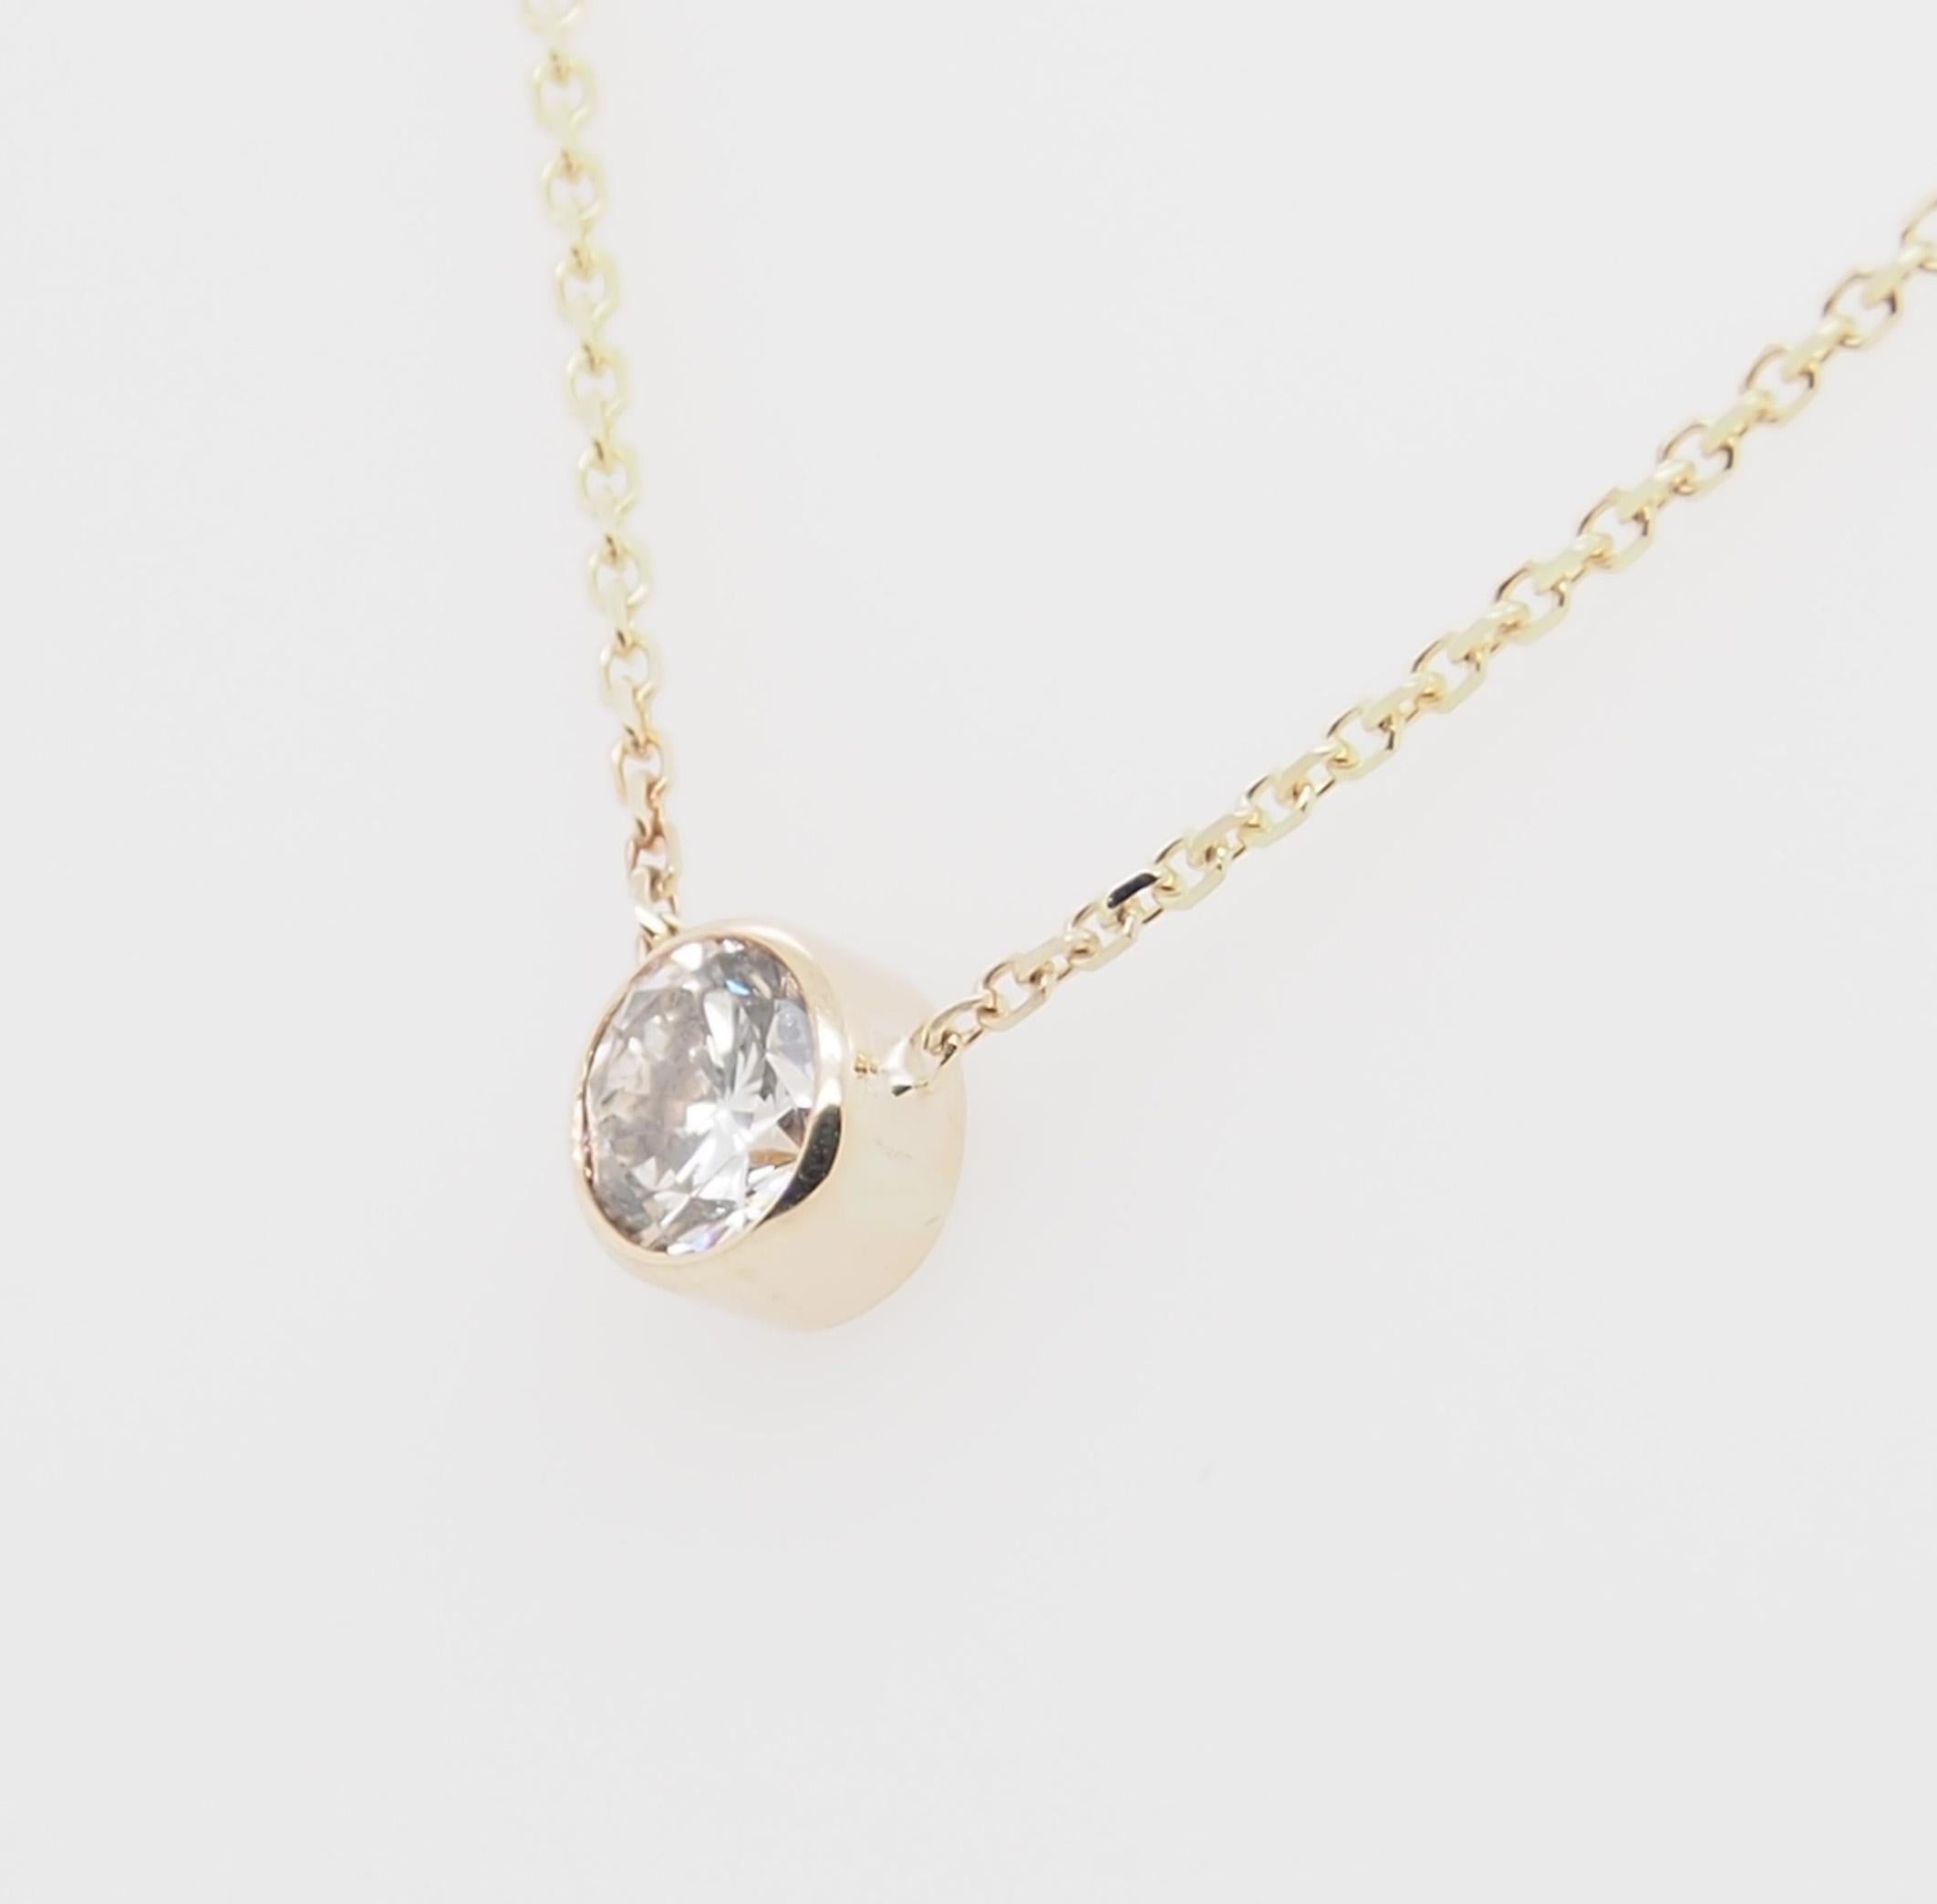 A classic bezel set solitaire Pendant in 14K yellow gold. (1) Round Brilliant Cut Diamond .40 carat total weight I-J in color and SI in clarity set in a bezel on a 16 inch 1.1mm cable link chain.  Approximately 1.6 grams, 2/8 inch diameter.